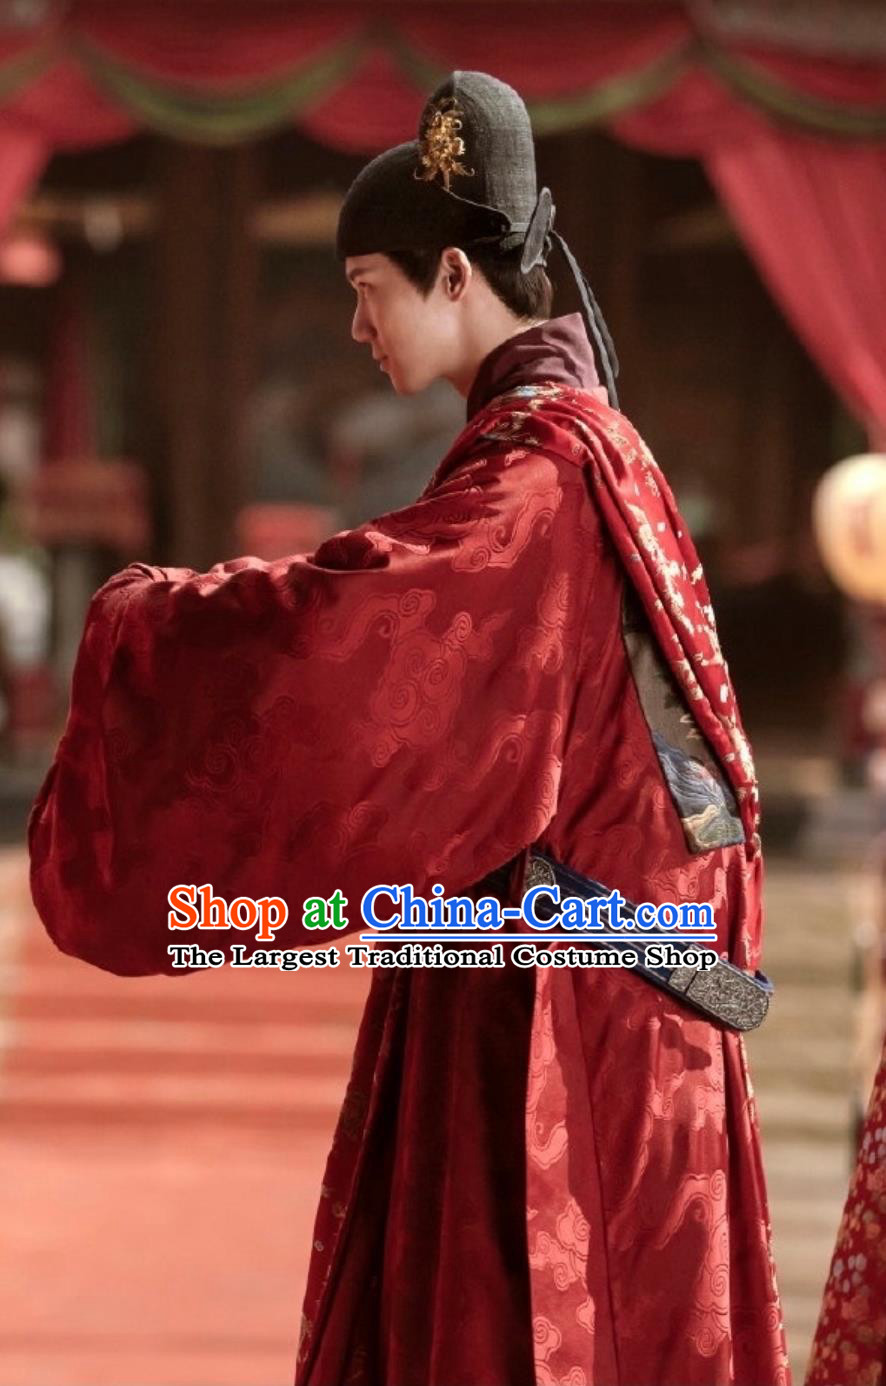 Ancient China Wedding Clothing TV Series Song of Youth Childe Sun Yu Lou Clothing Ming Dynasty Groom Garments Costumes